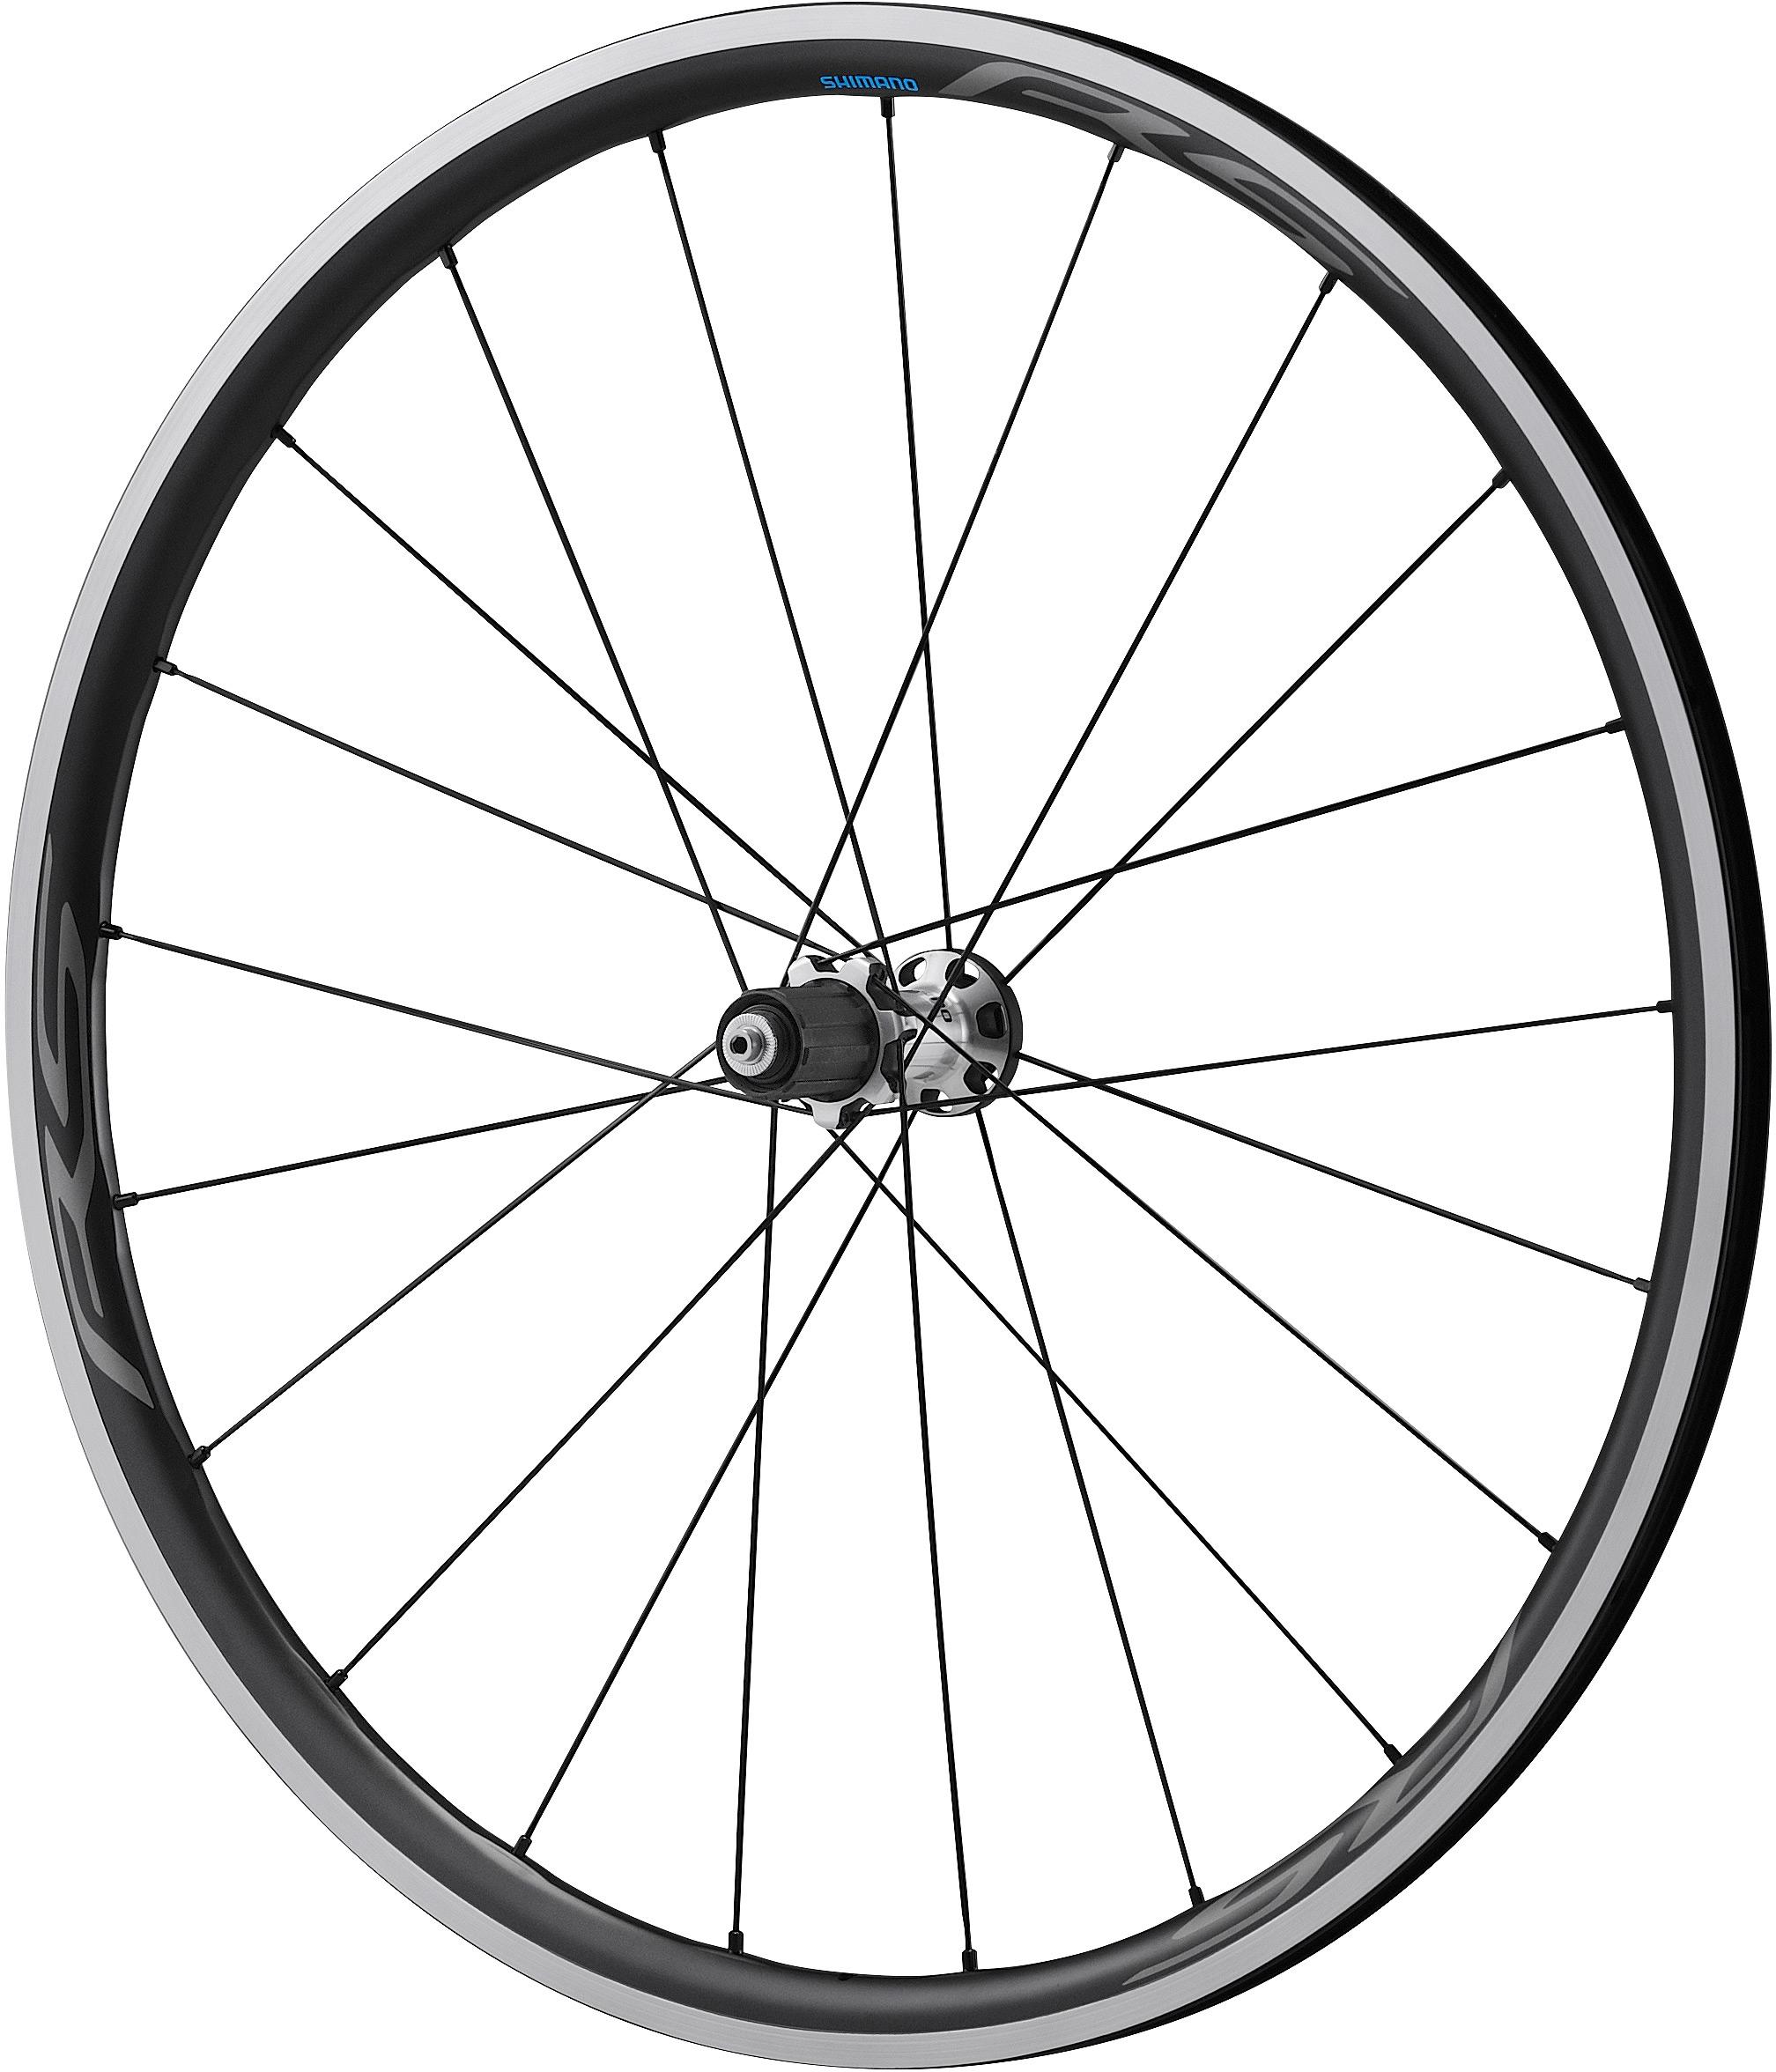 Rs700, C30-Tl, Tubeless Compatible, 9/10/11-Speed, 130 Mm Q/R Axle, Rear, Black